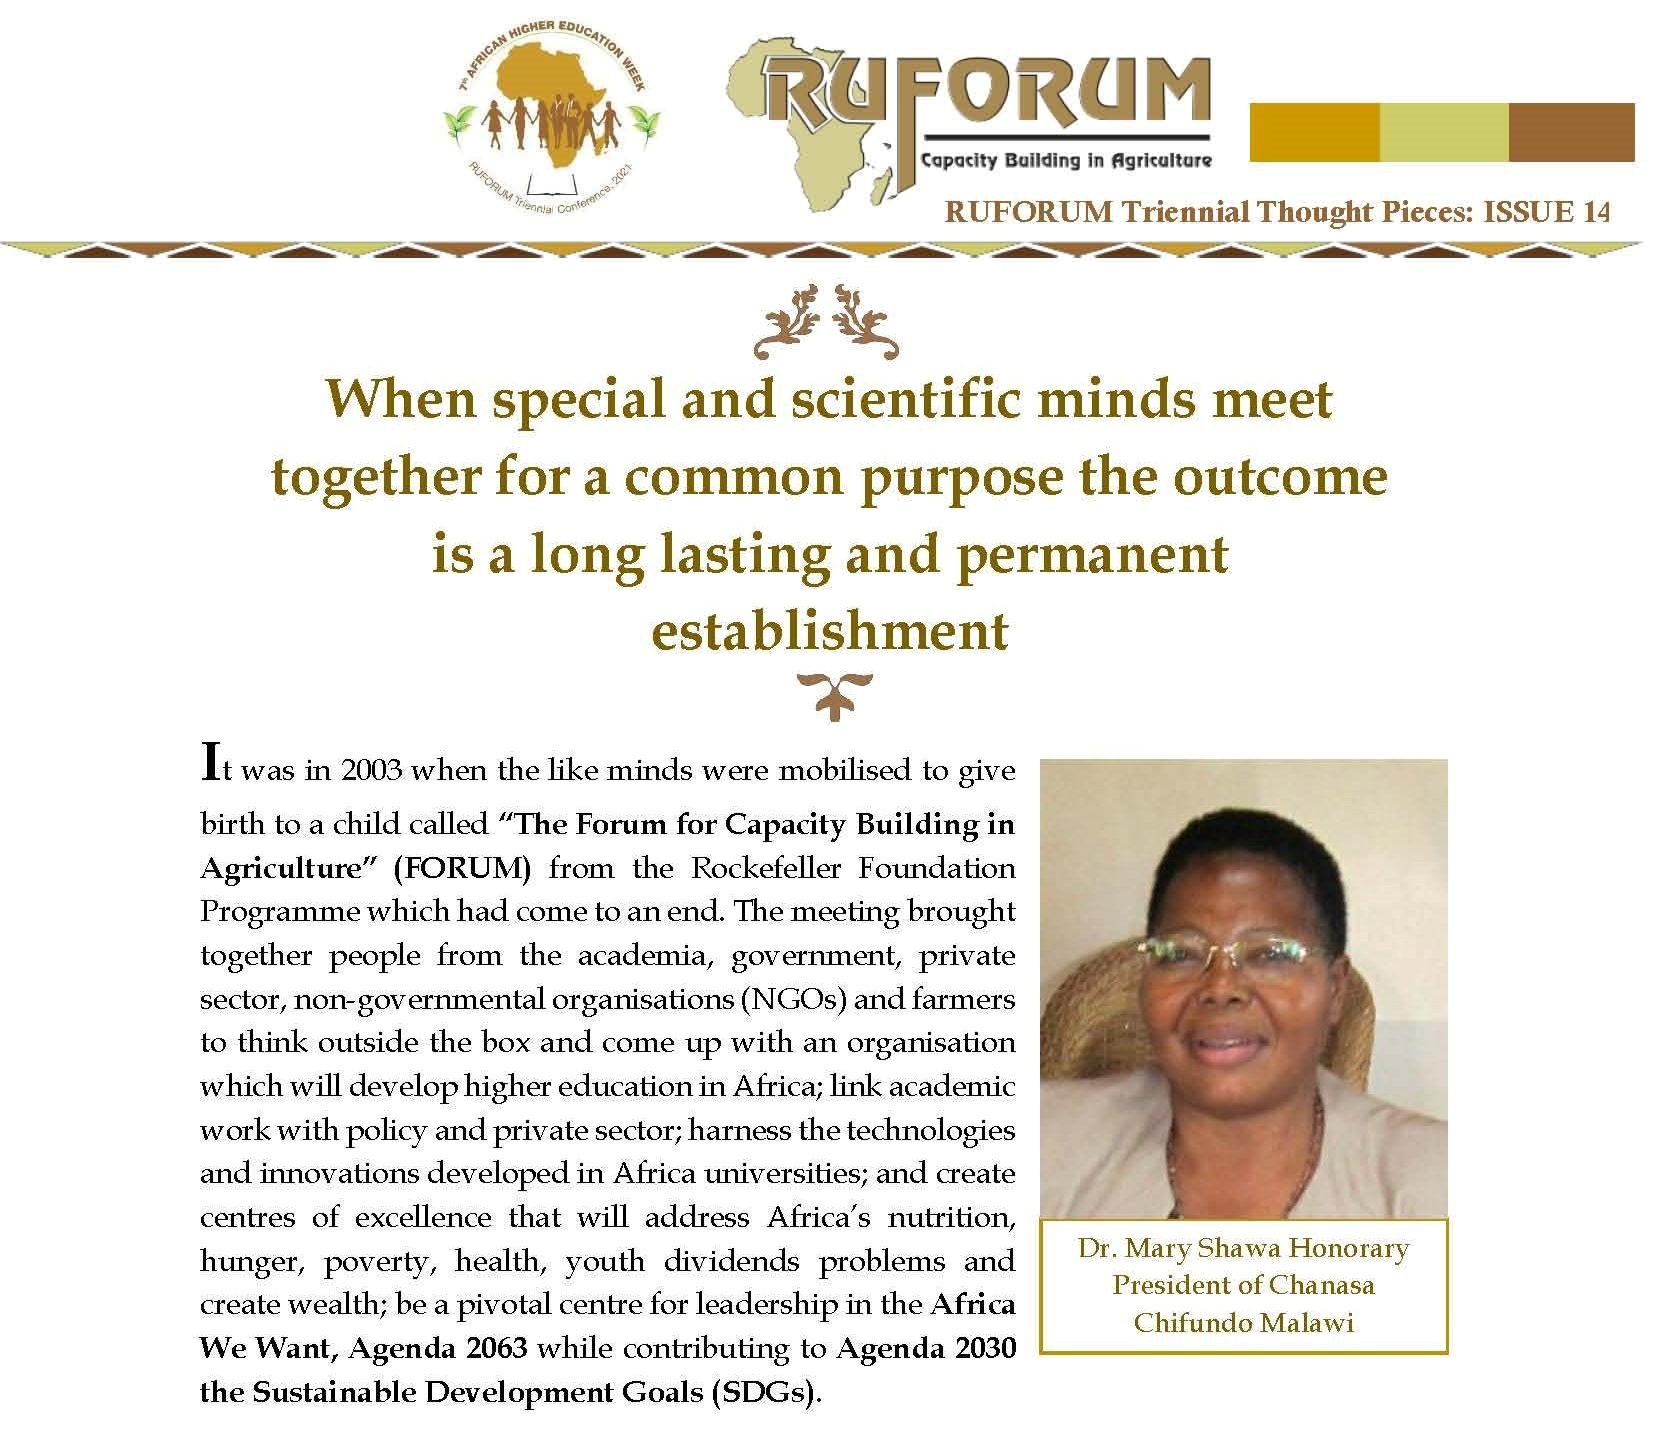 RUFORUM Triennial Thought Pieces: ISSUE 14 by Dr. Mary Shawa, Honorary President of Chanasa Chifundo Malawi.